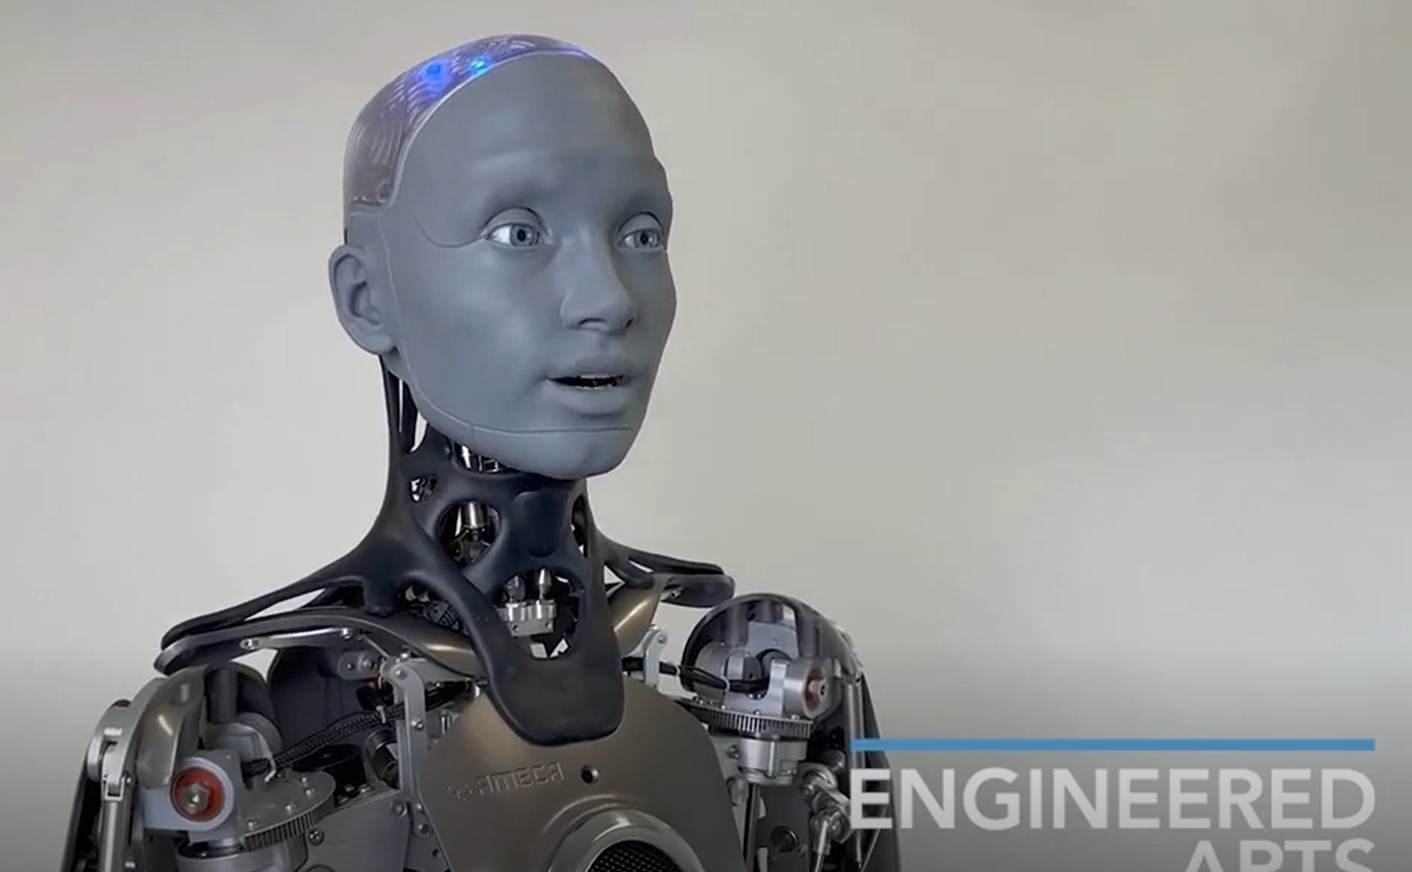 Cutting-edge AI robot delivers unsettling response when asked if it can create more of itself 1